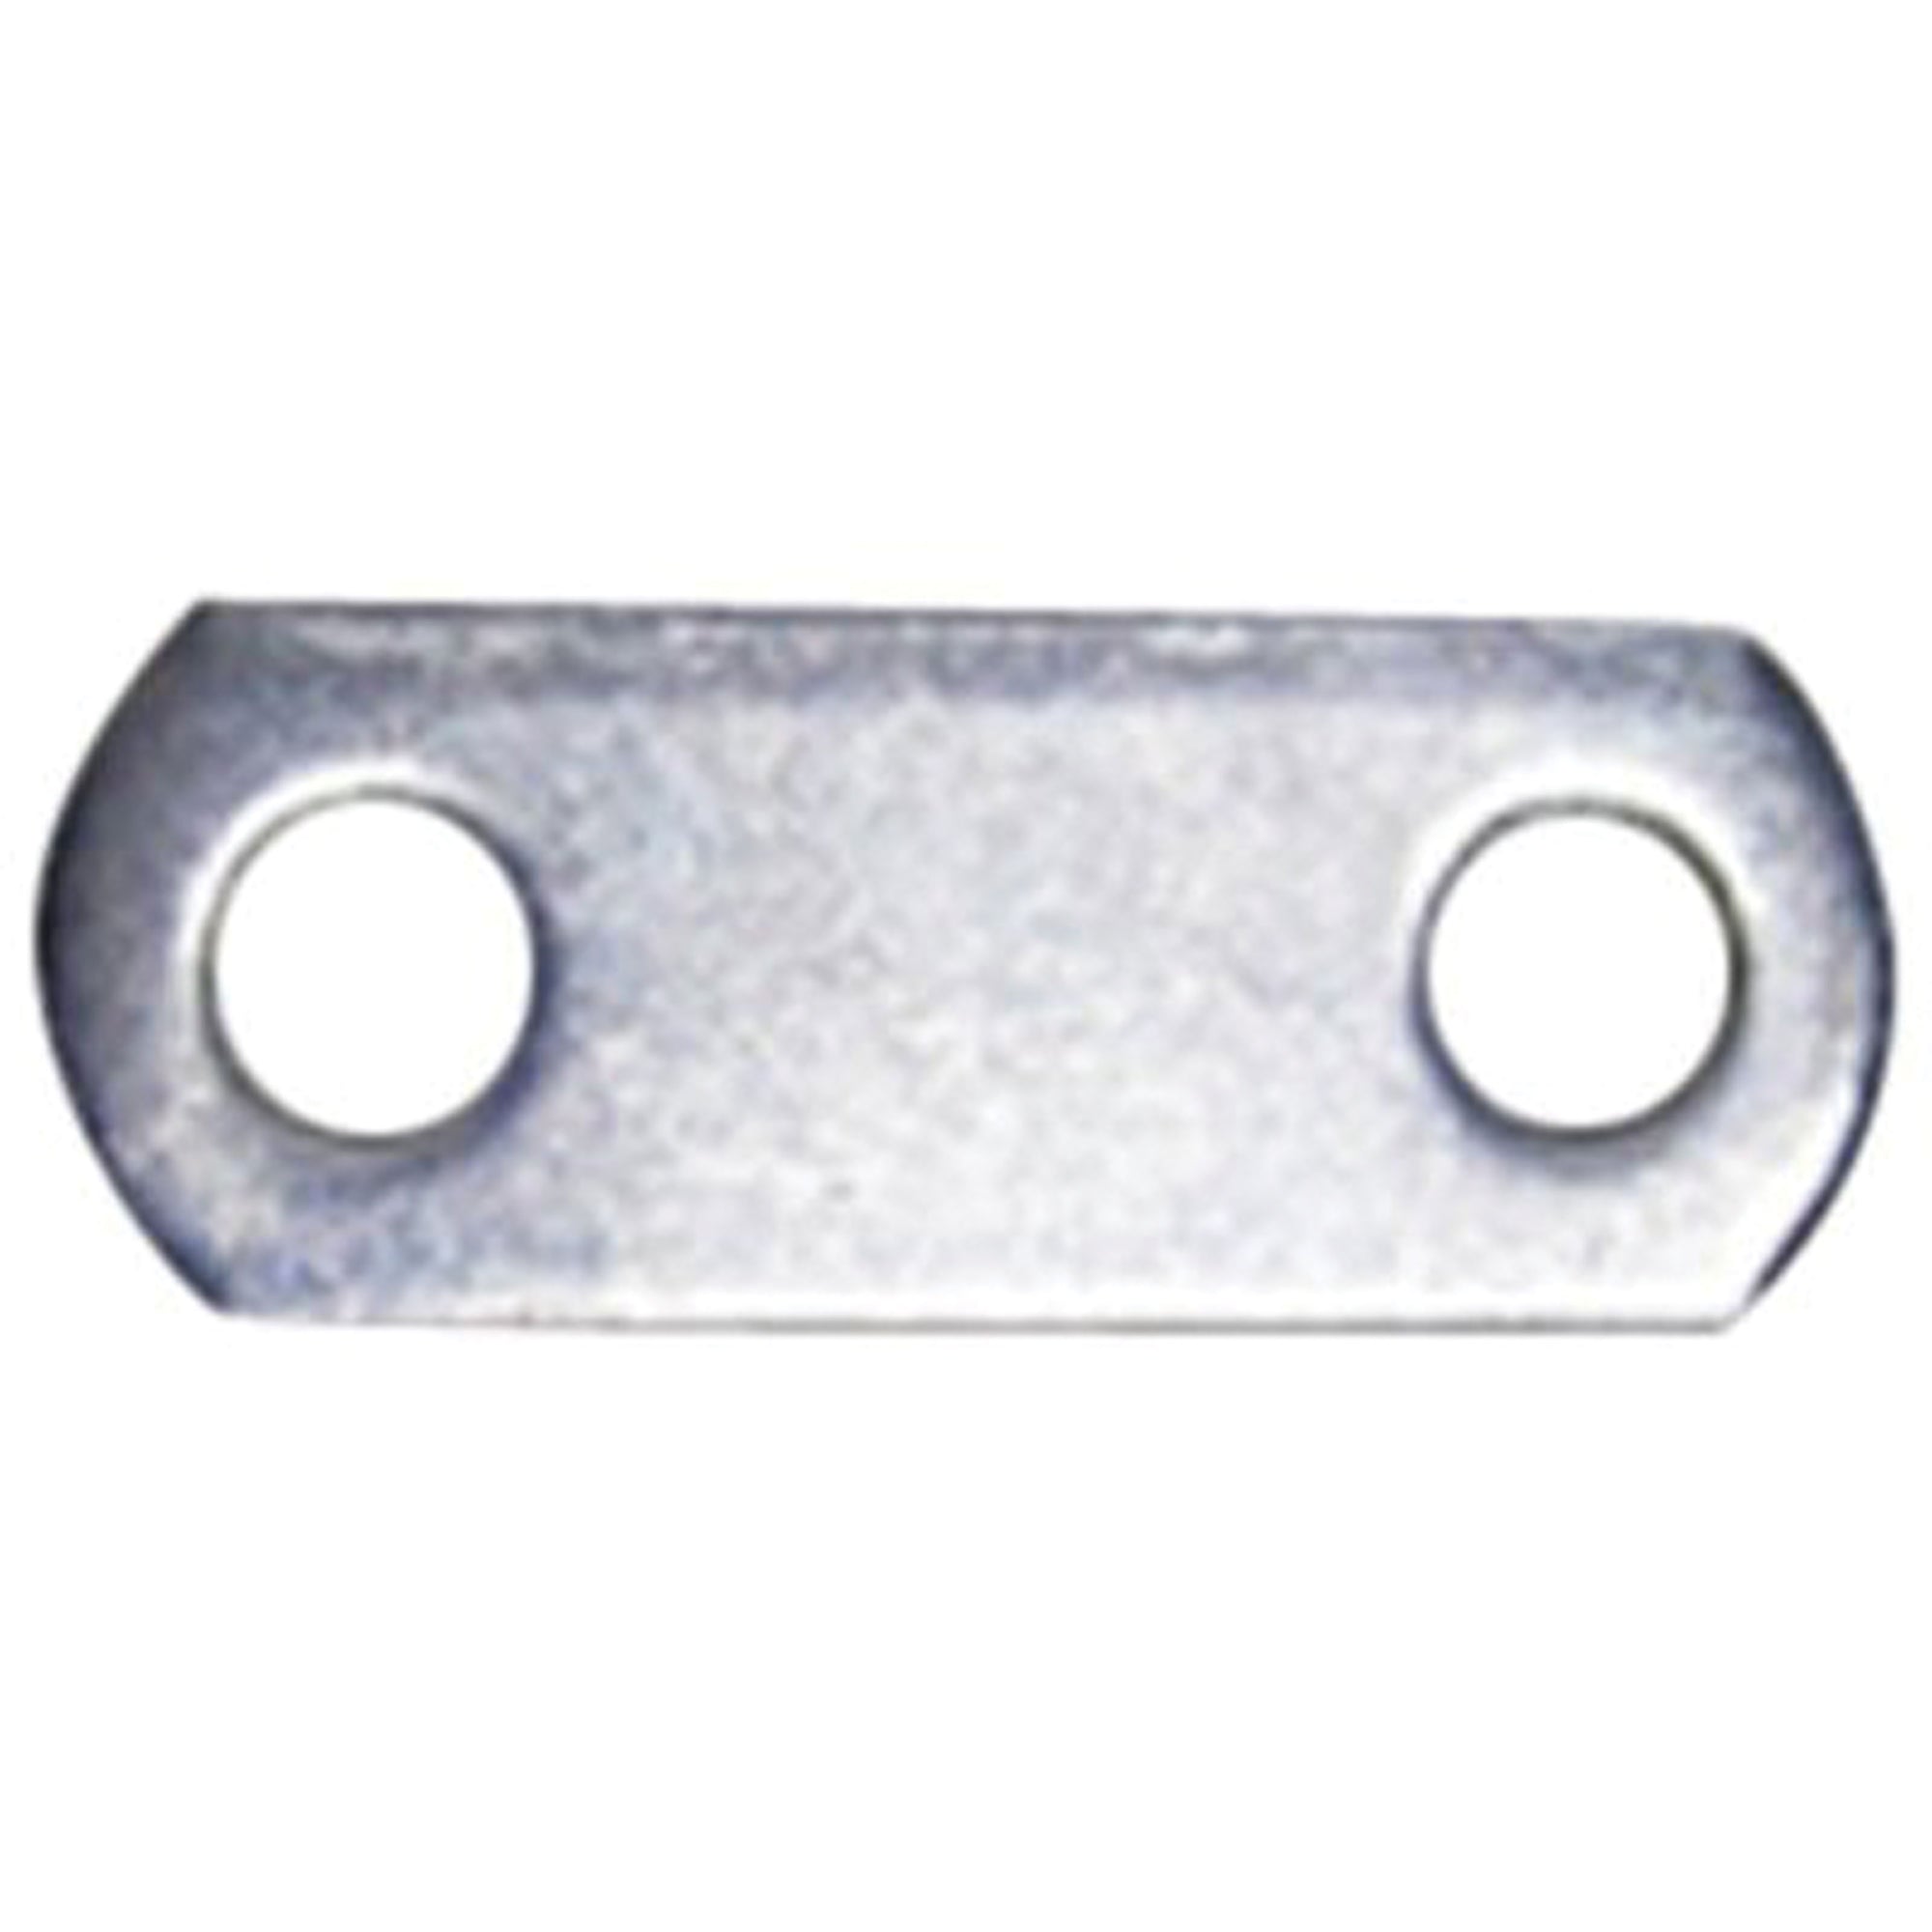 AP Products 014-133207 Shackle Link - 3-1/8 in., Silver Zinc